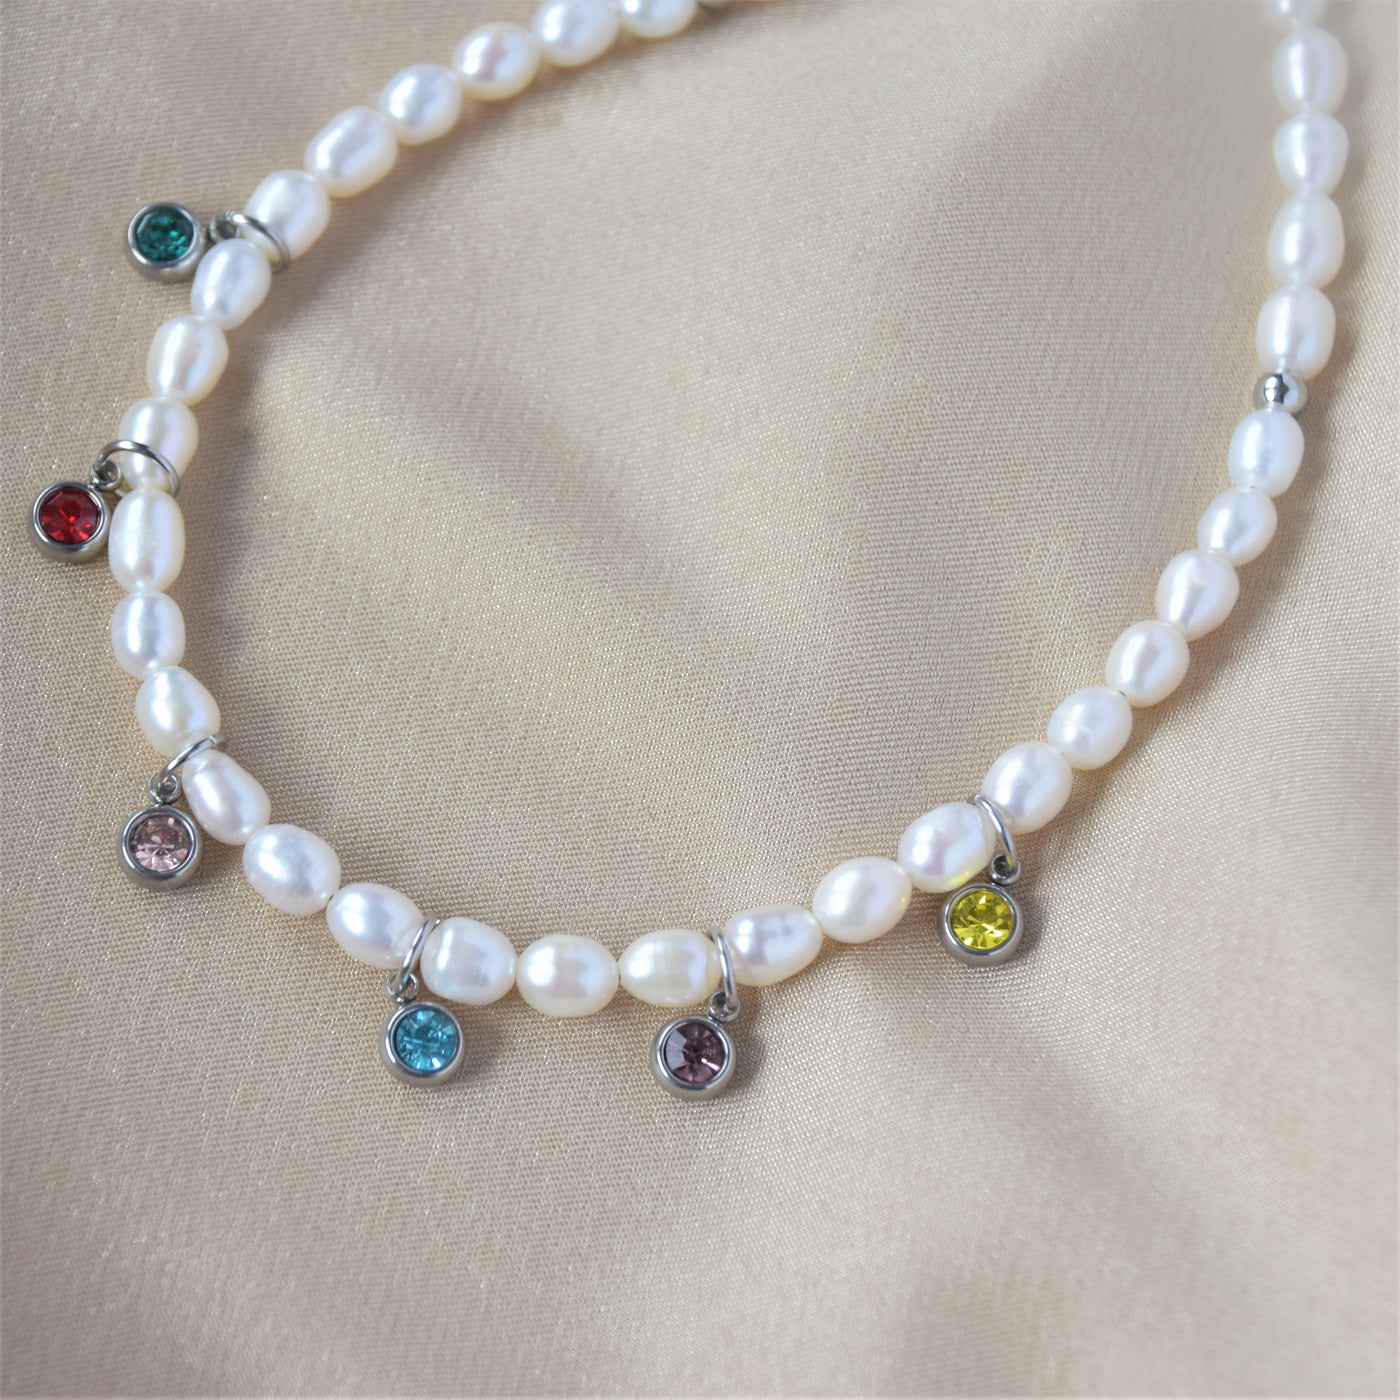 Playful pearl necklace